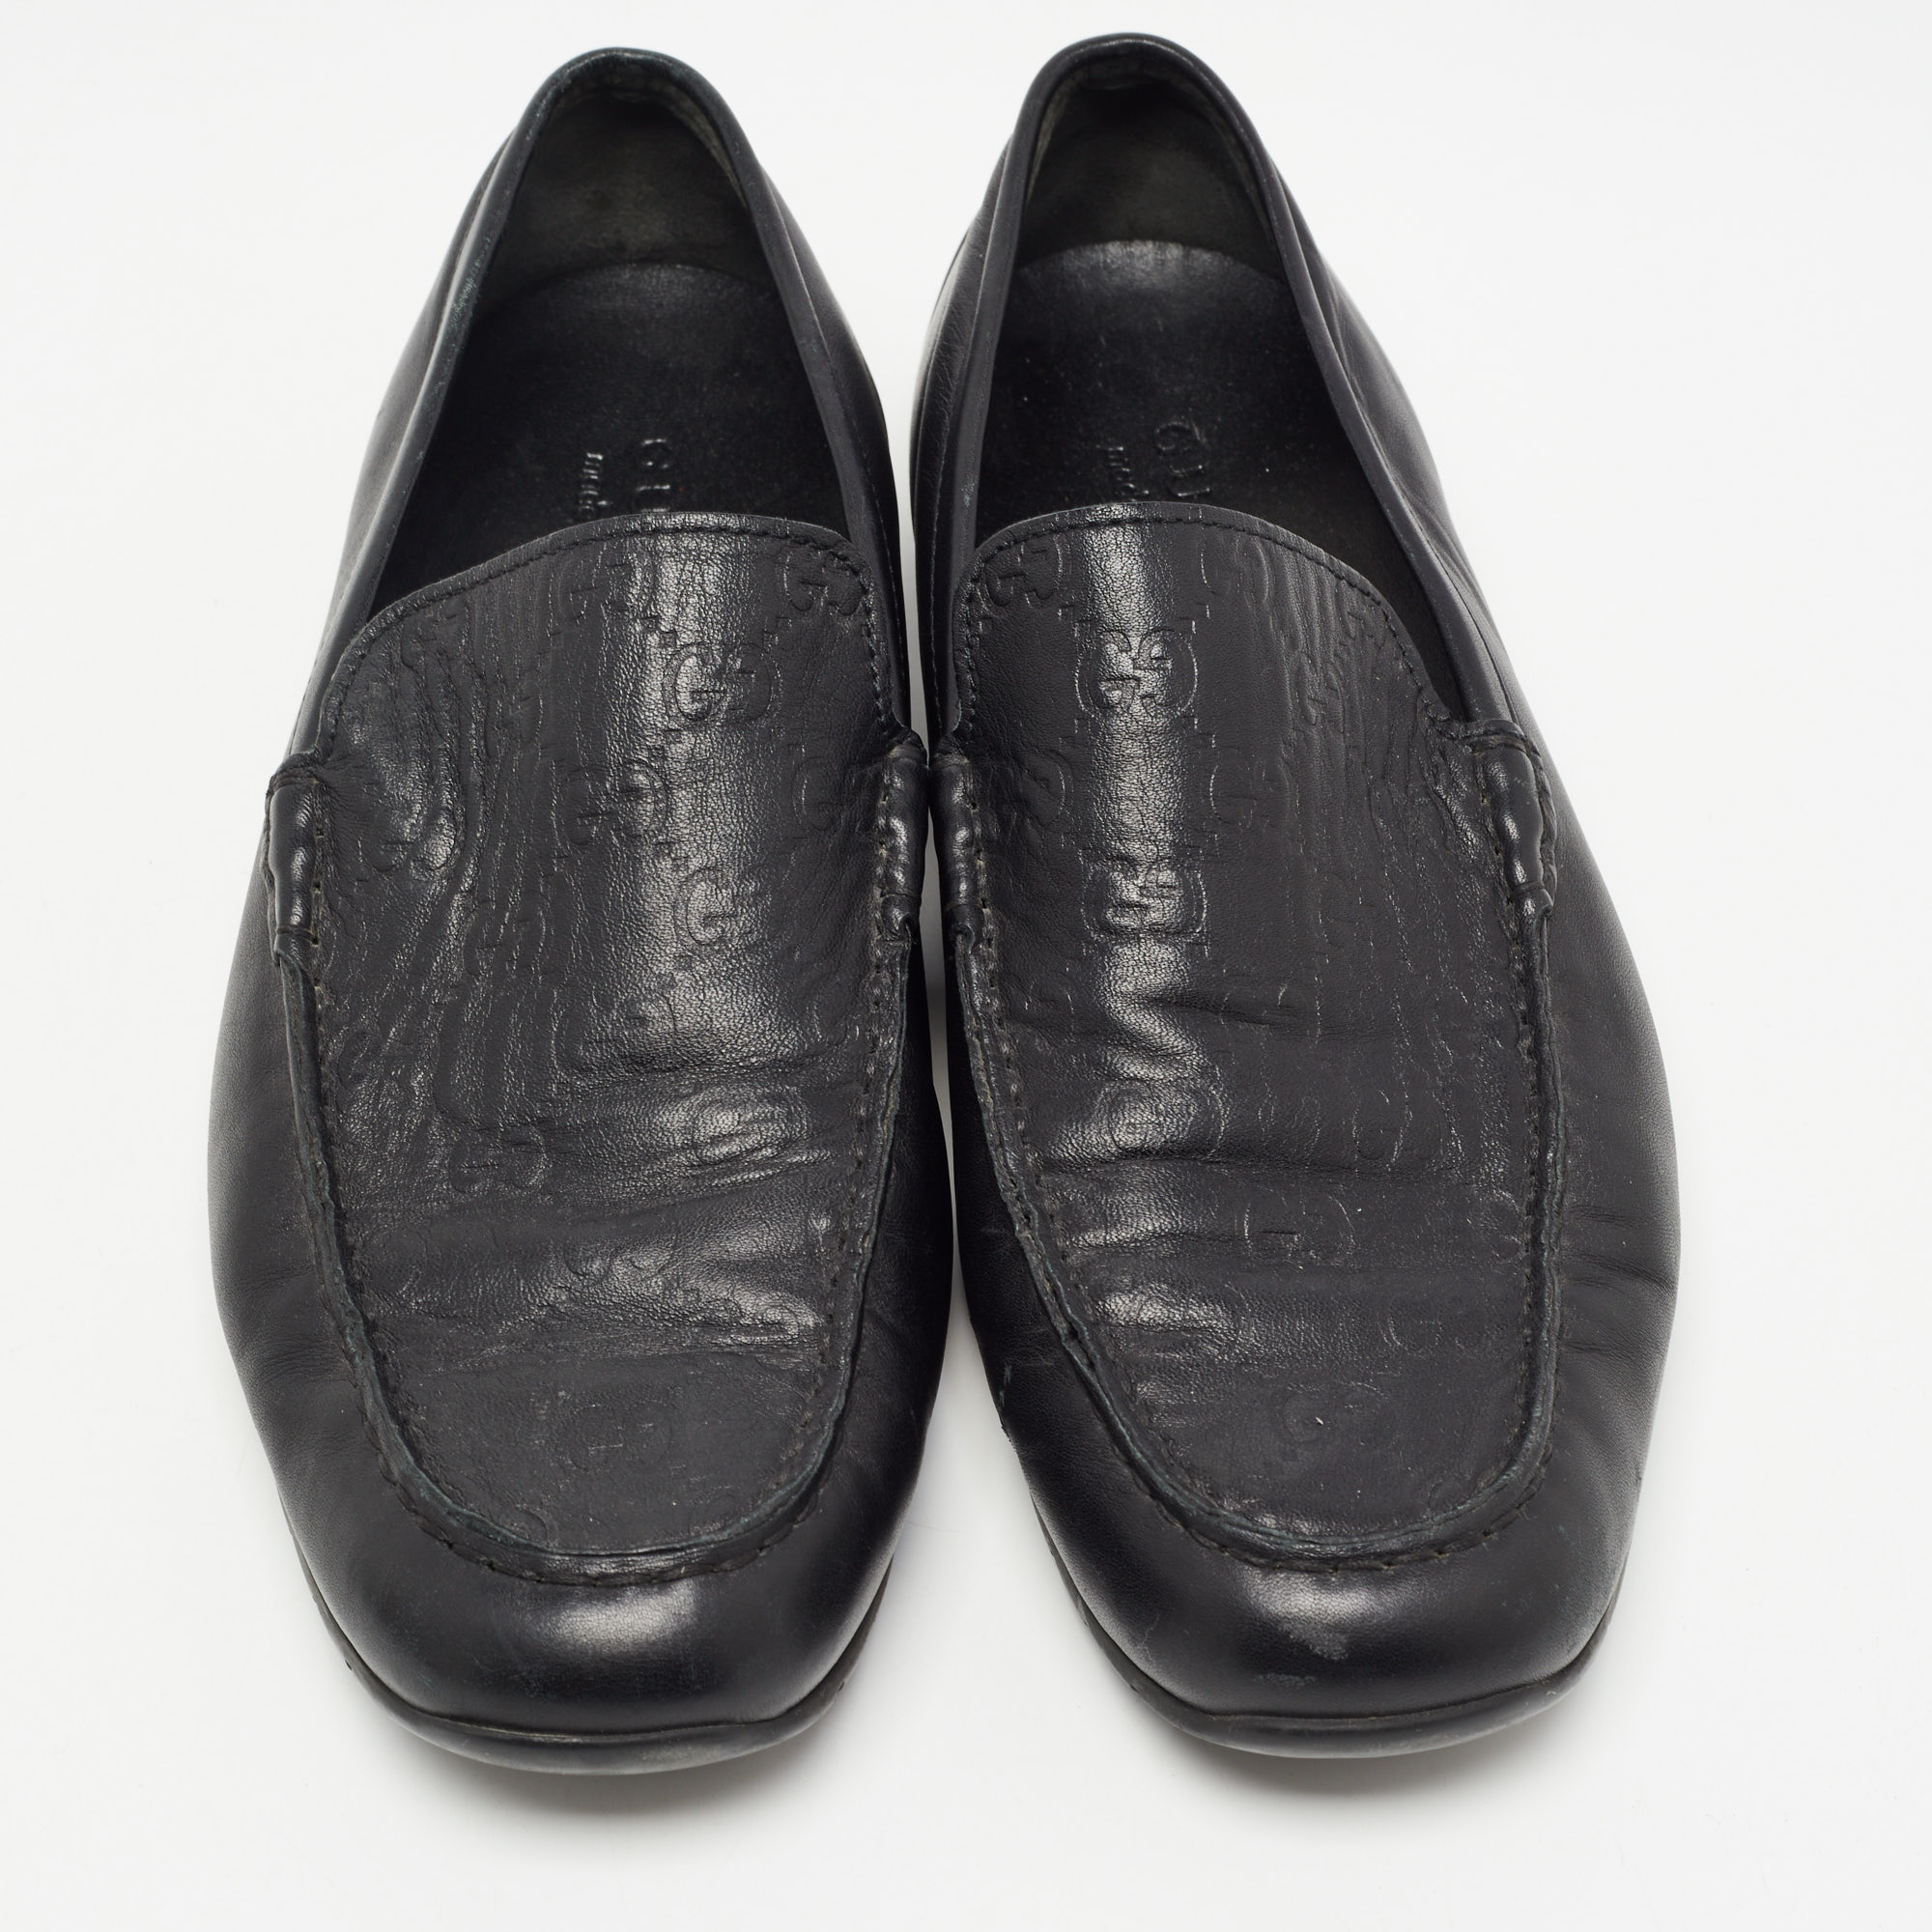 Gucci Black Guccissima Leather Slip On Loafers Size 42